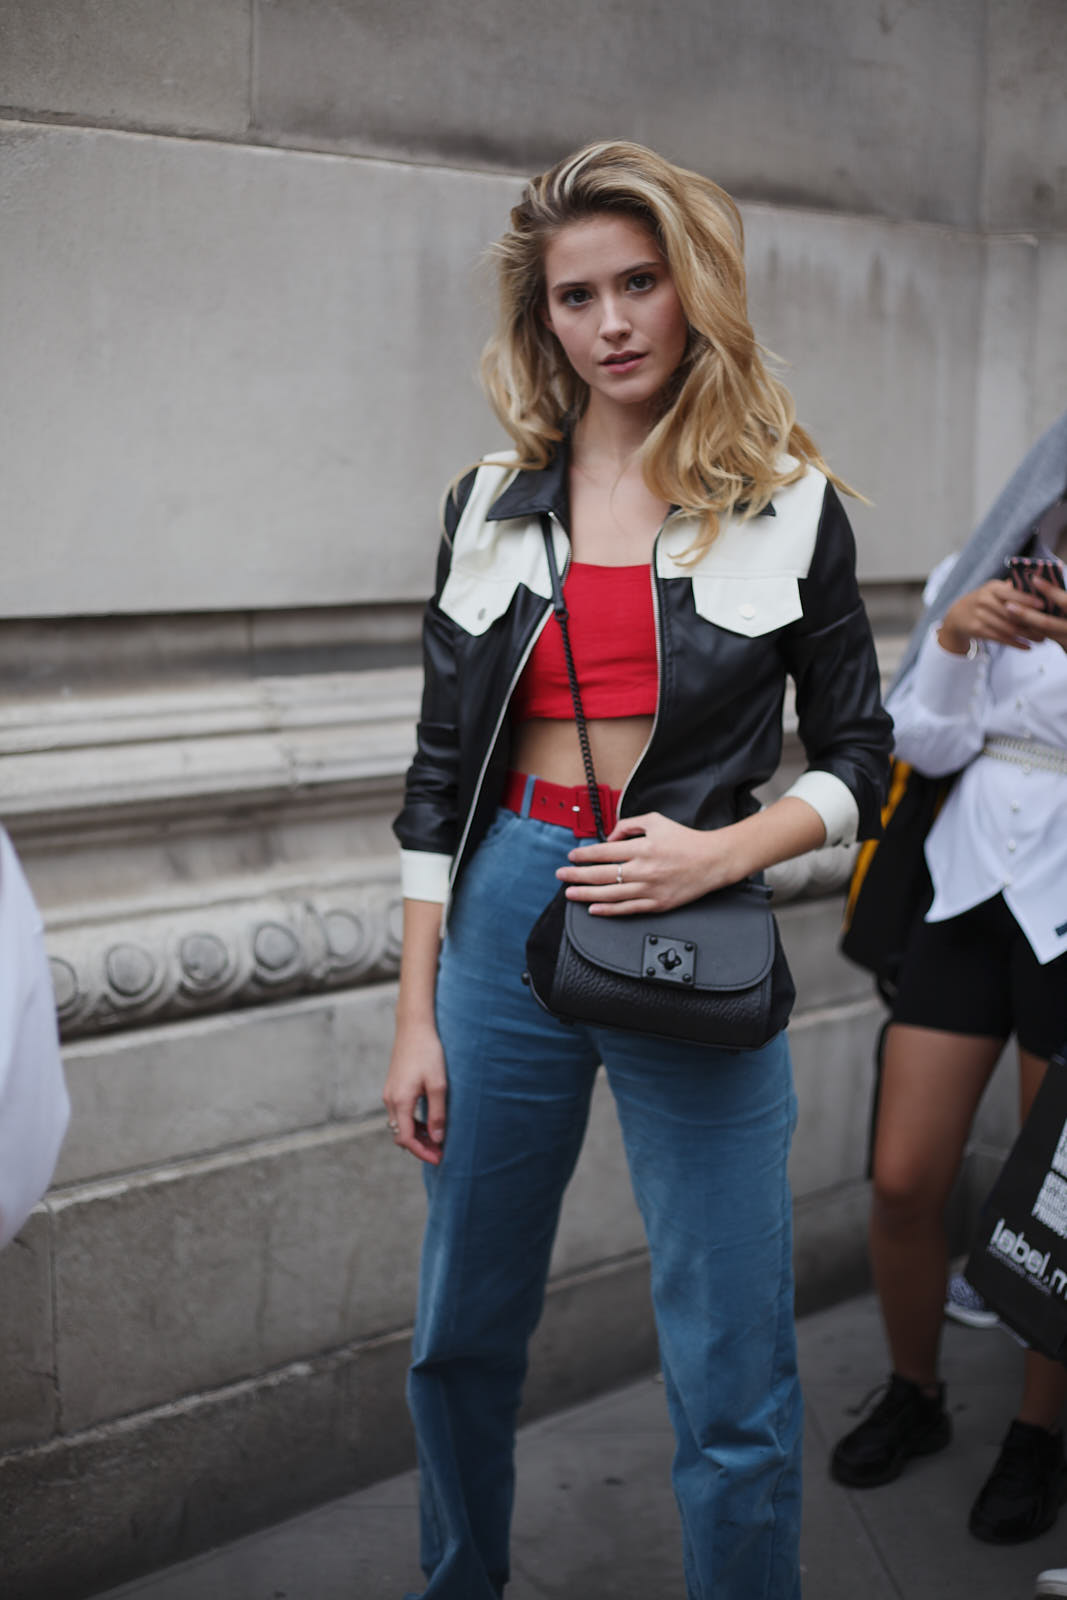 London Fashion by Paul: Street Muses